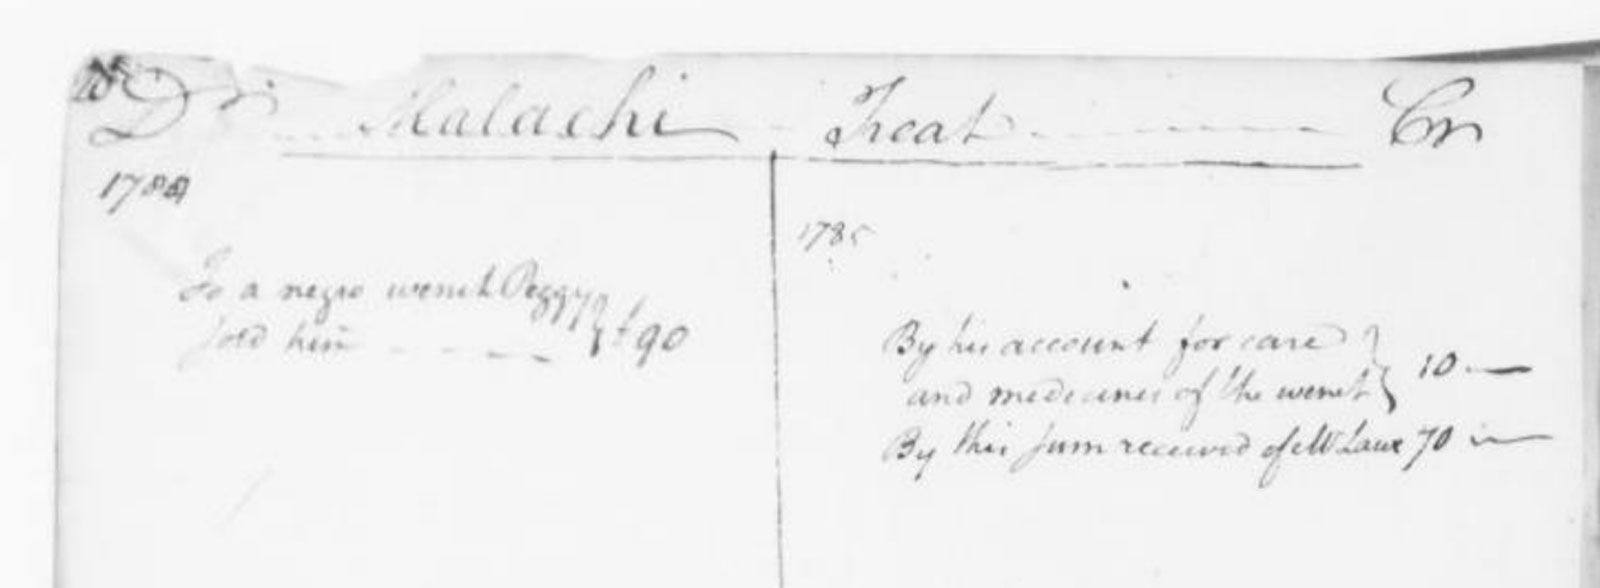 A 1784 entry from Hamilton's cash books documenting the sale of a woman named Peggy.